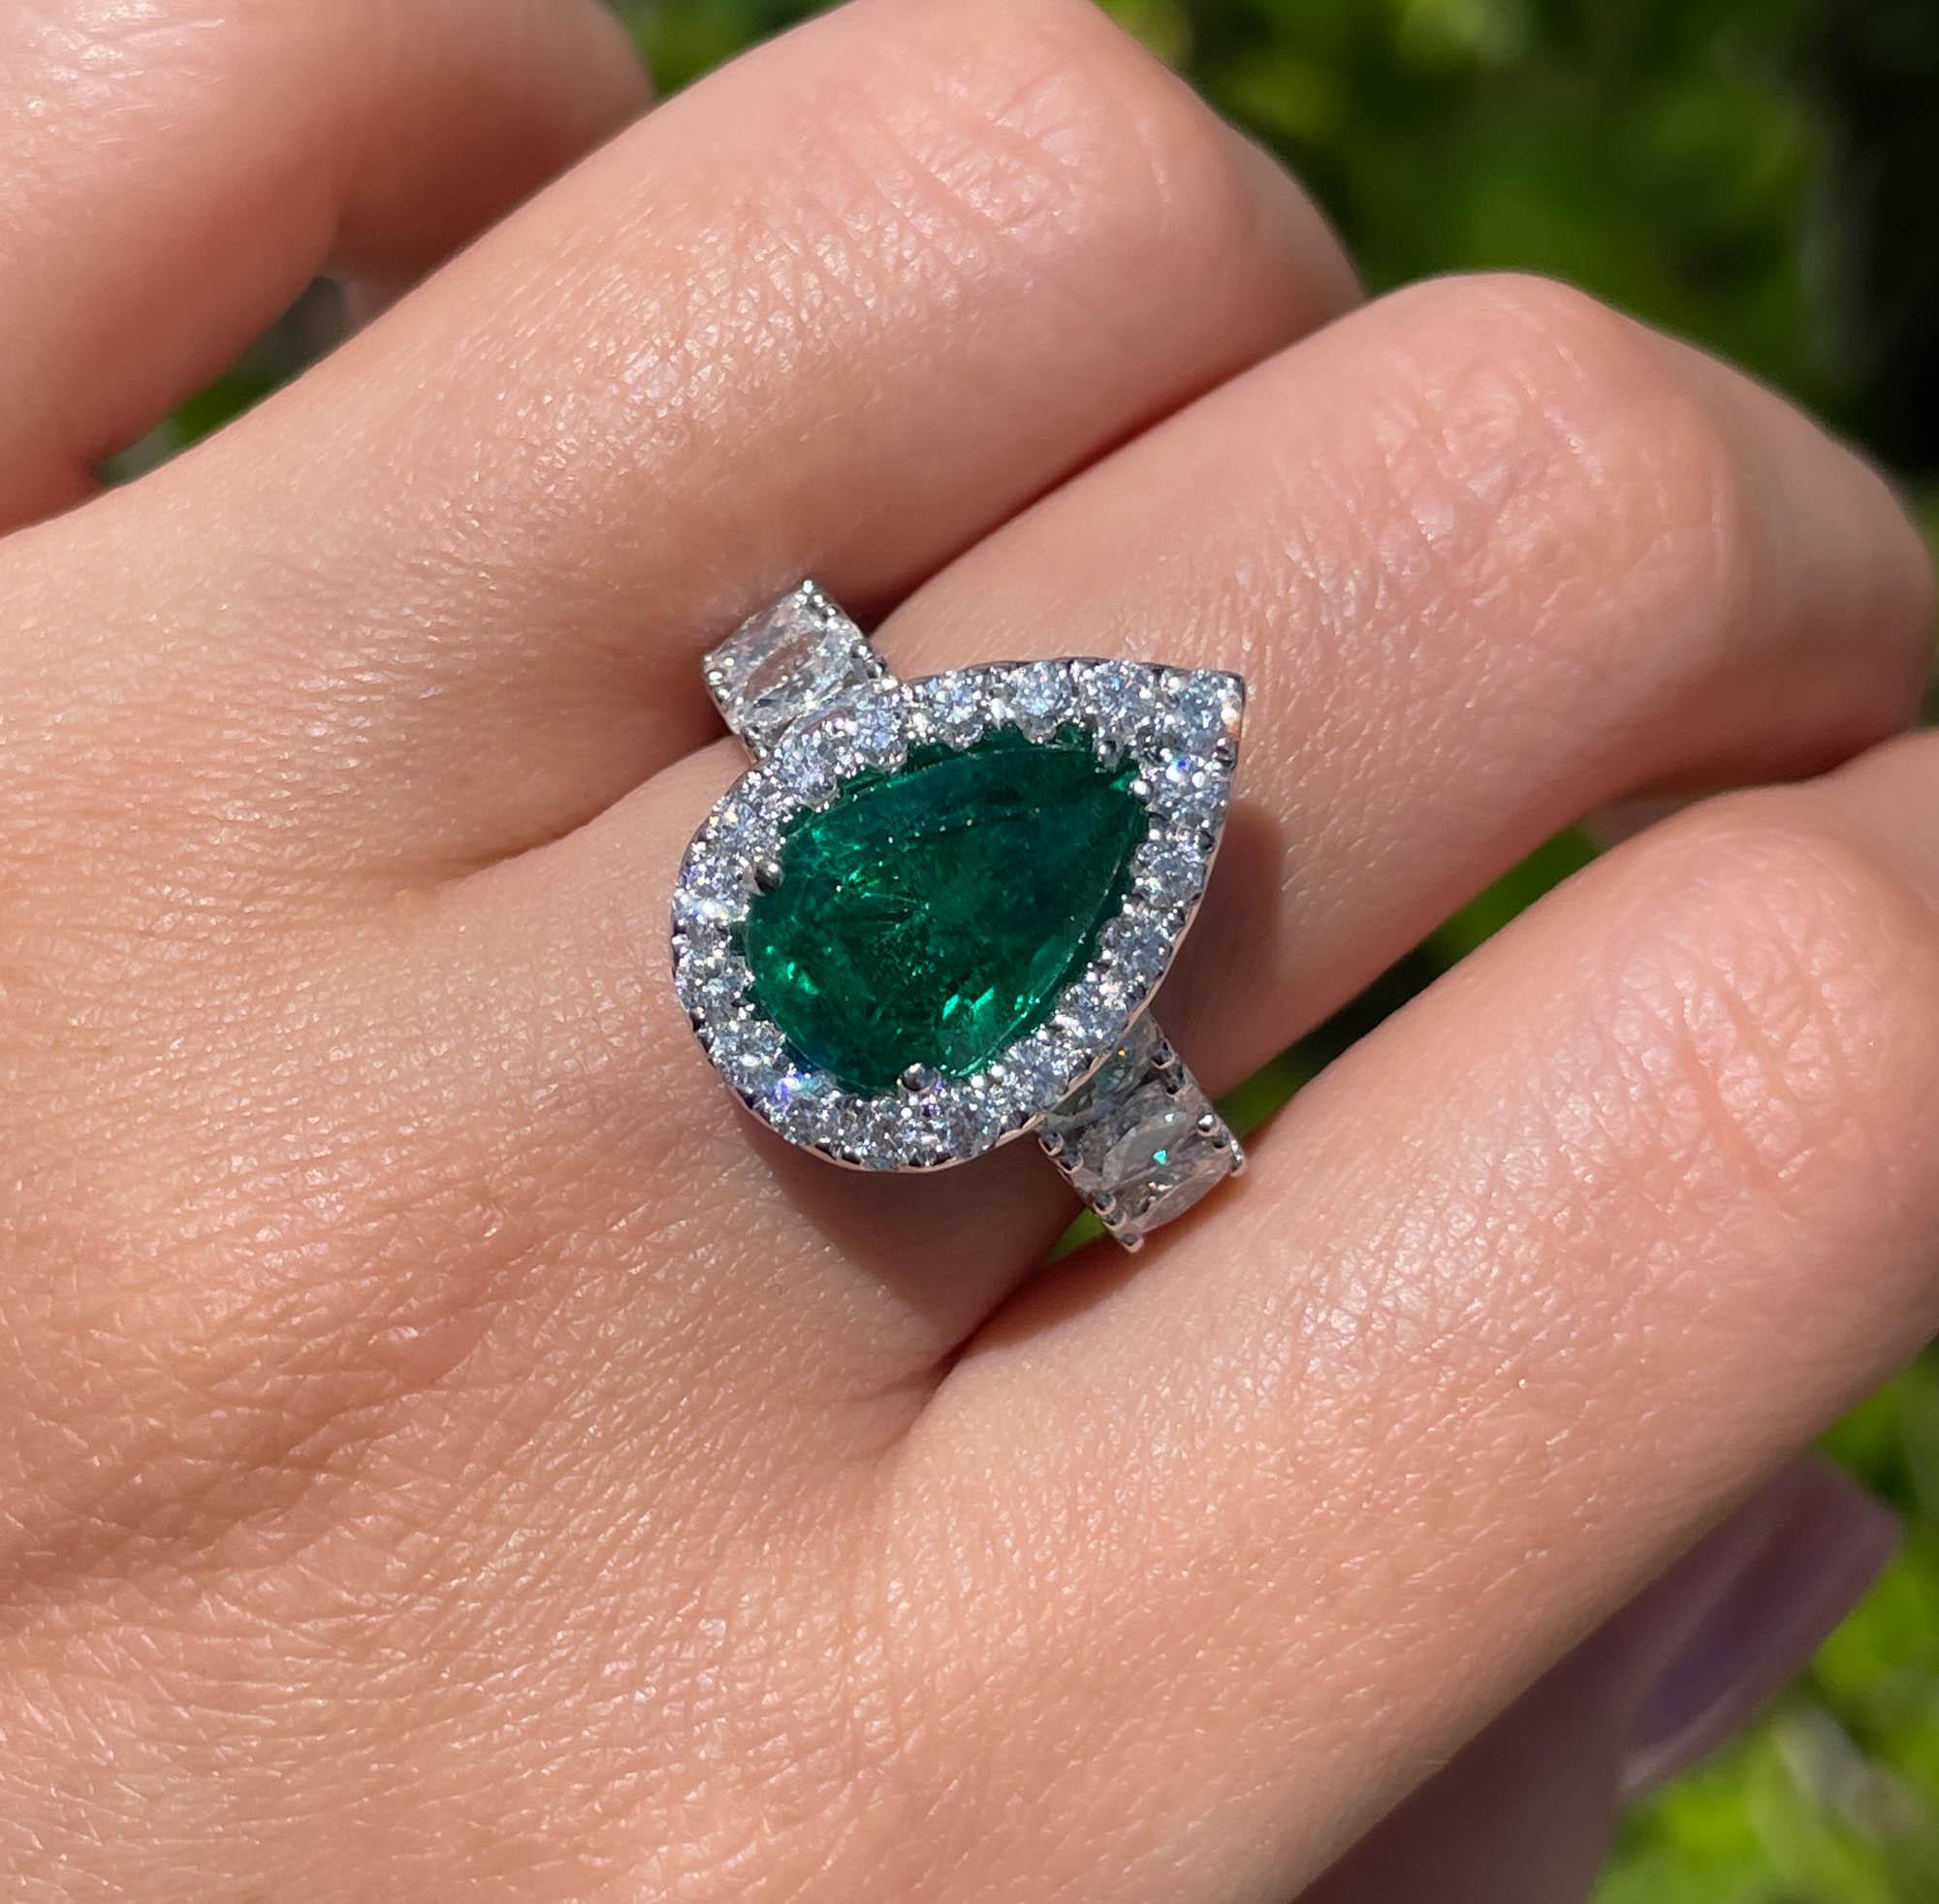 Classic 18k White Gold Green Emerald and Diamond Engagement Right Hand Ring 
The center stone is Natural Pear Shaped Green Emerald; total weight is 3.52ct.
It is set with 6 large oval shaped side diamonds on the band; estimated weight is 1.26ctw.